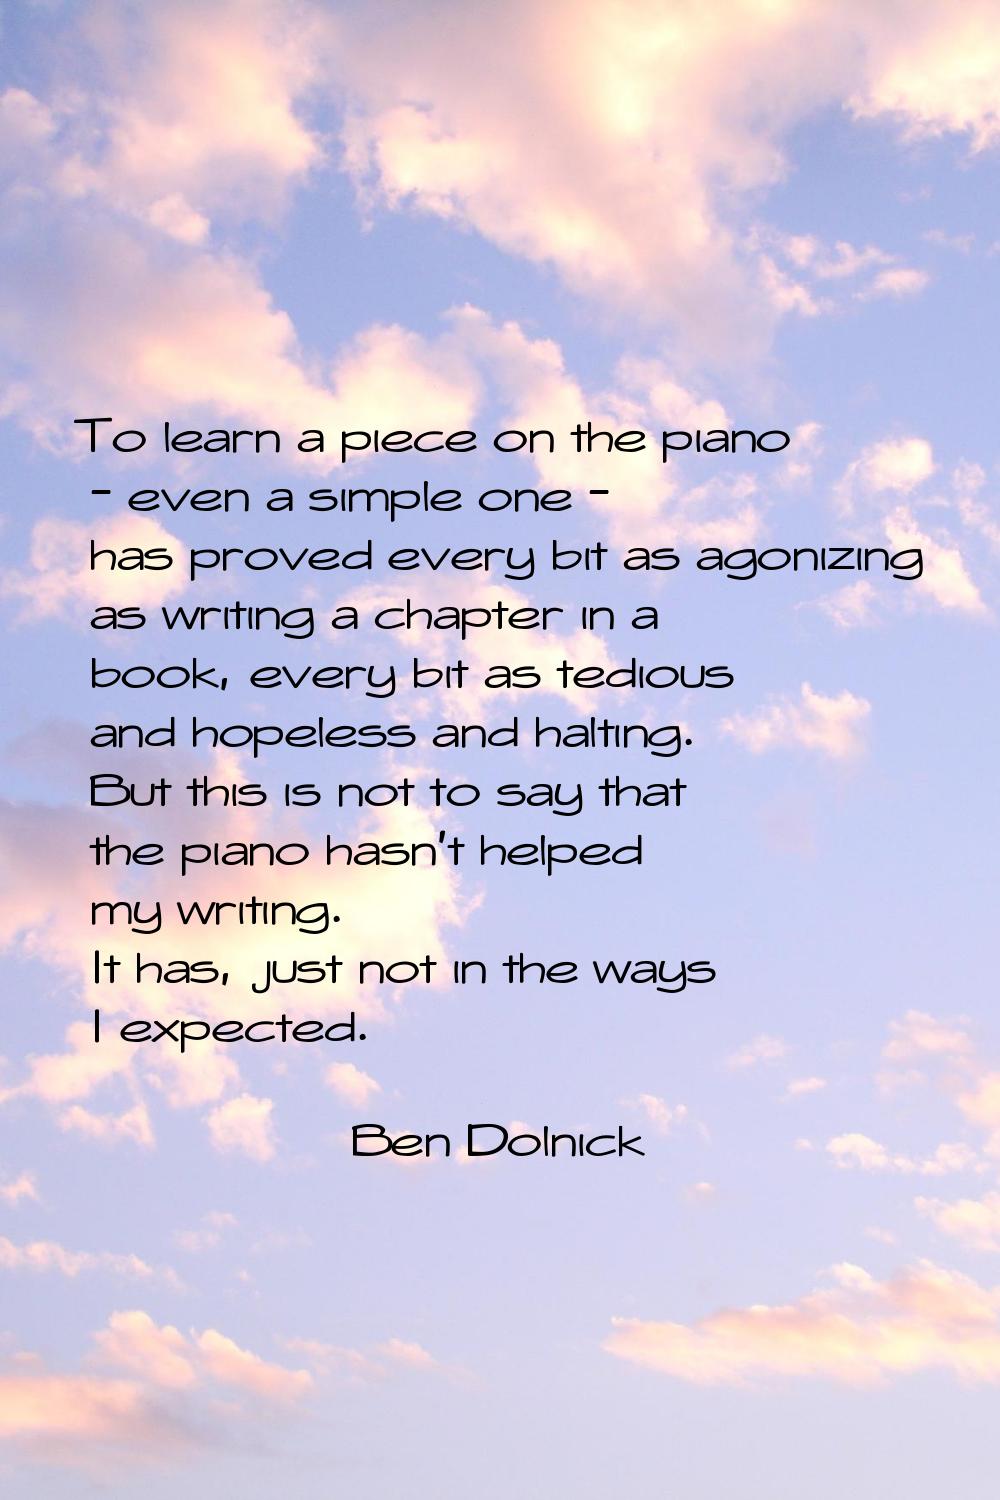 To learn a piece on the piano - even a simple one - has proved every bit as agonizing as writing a 